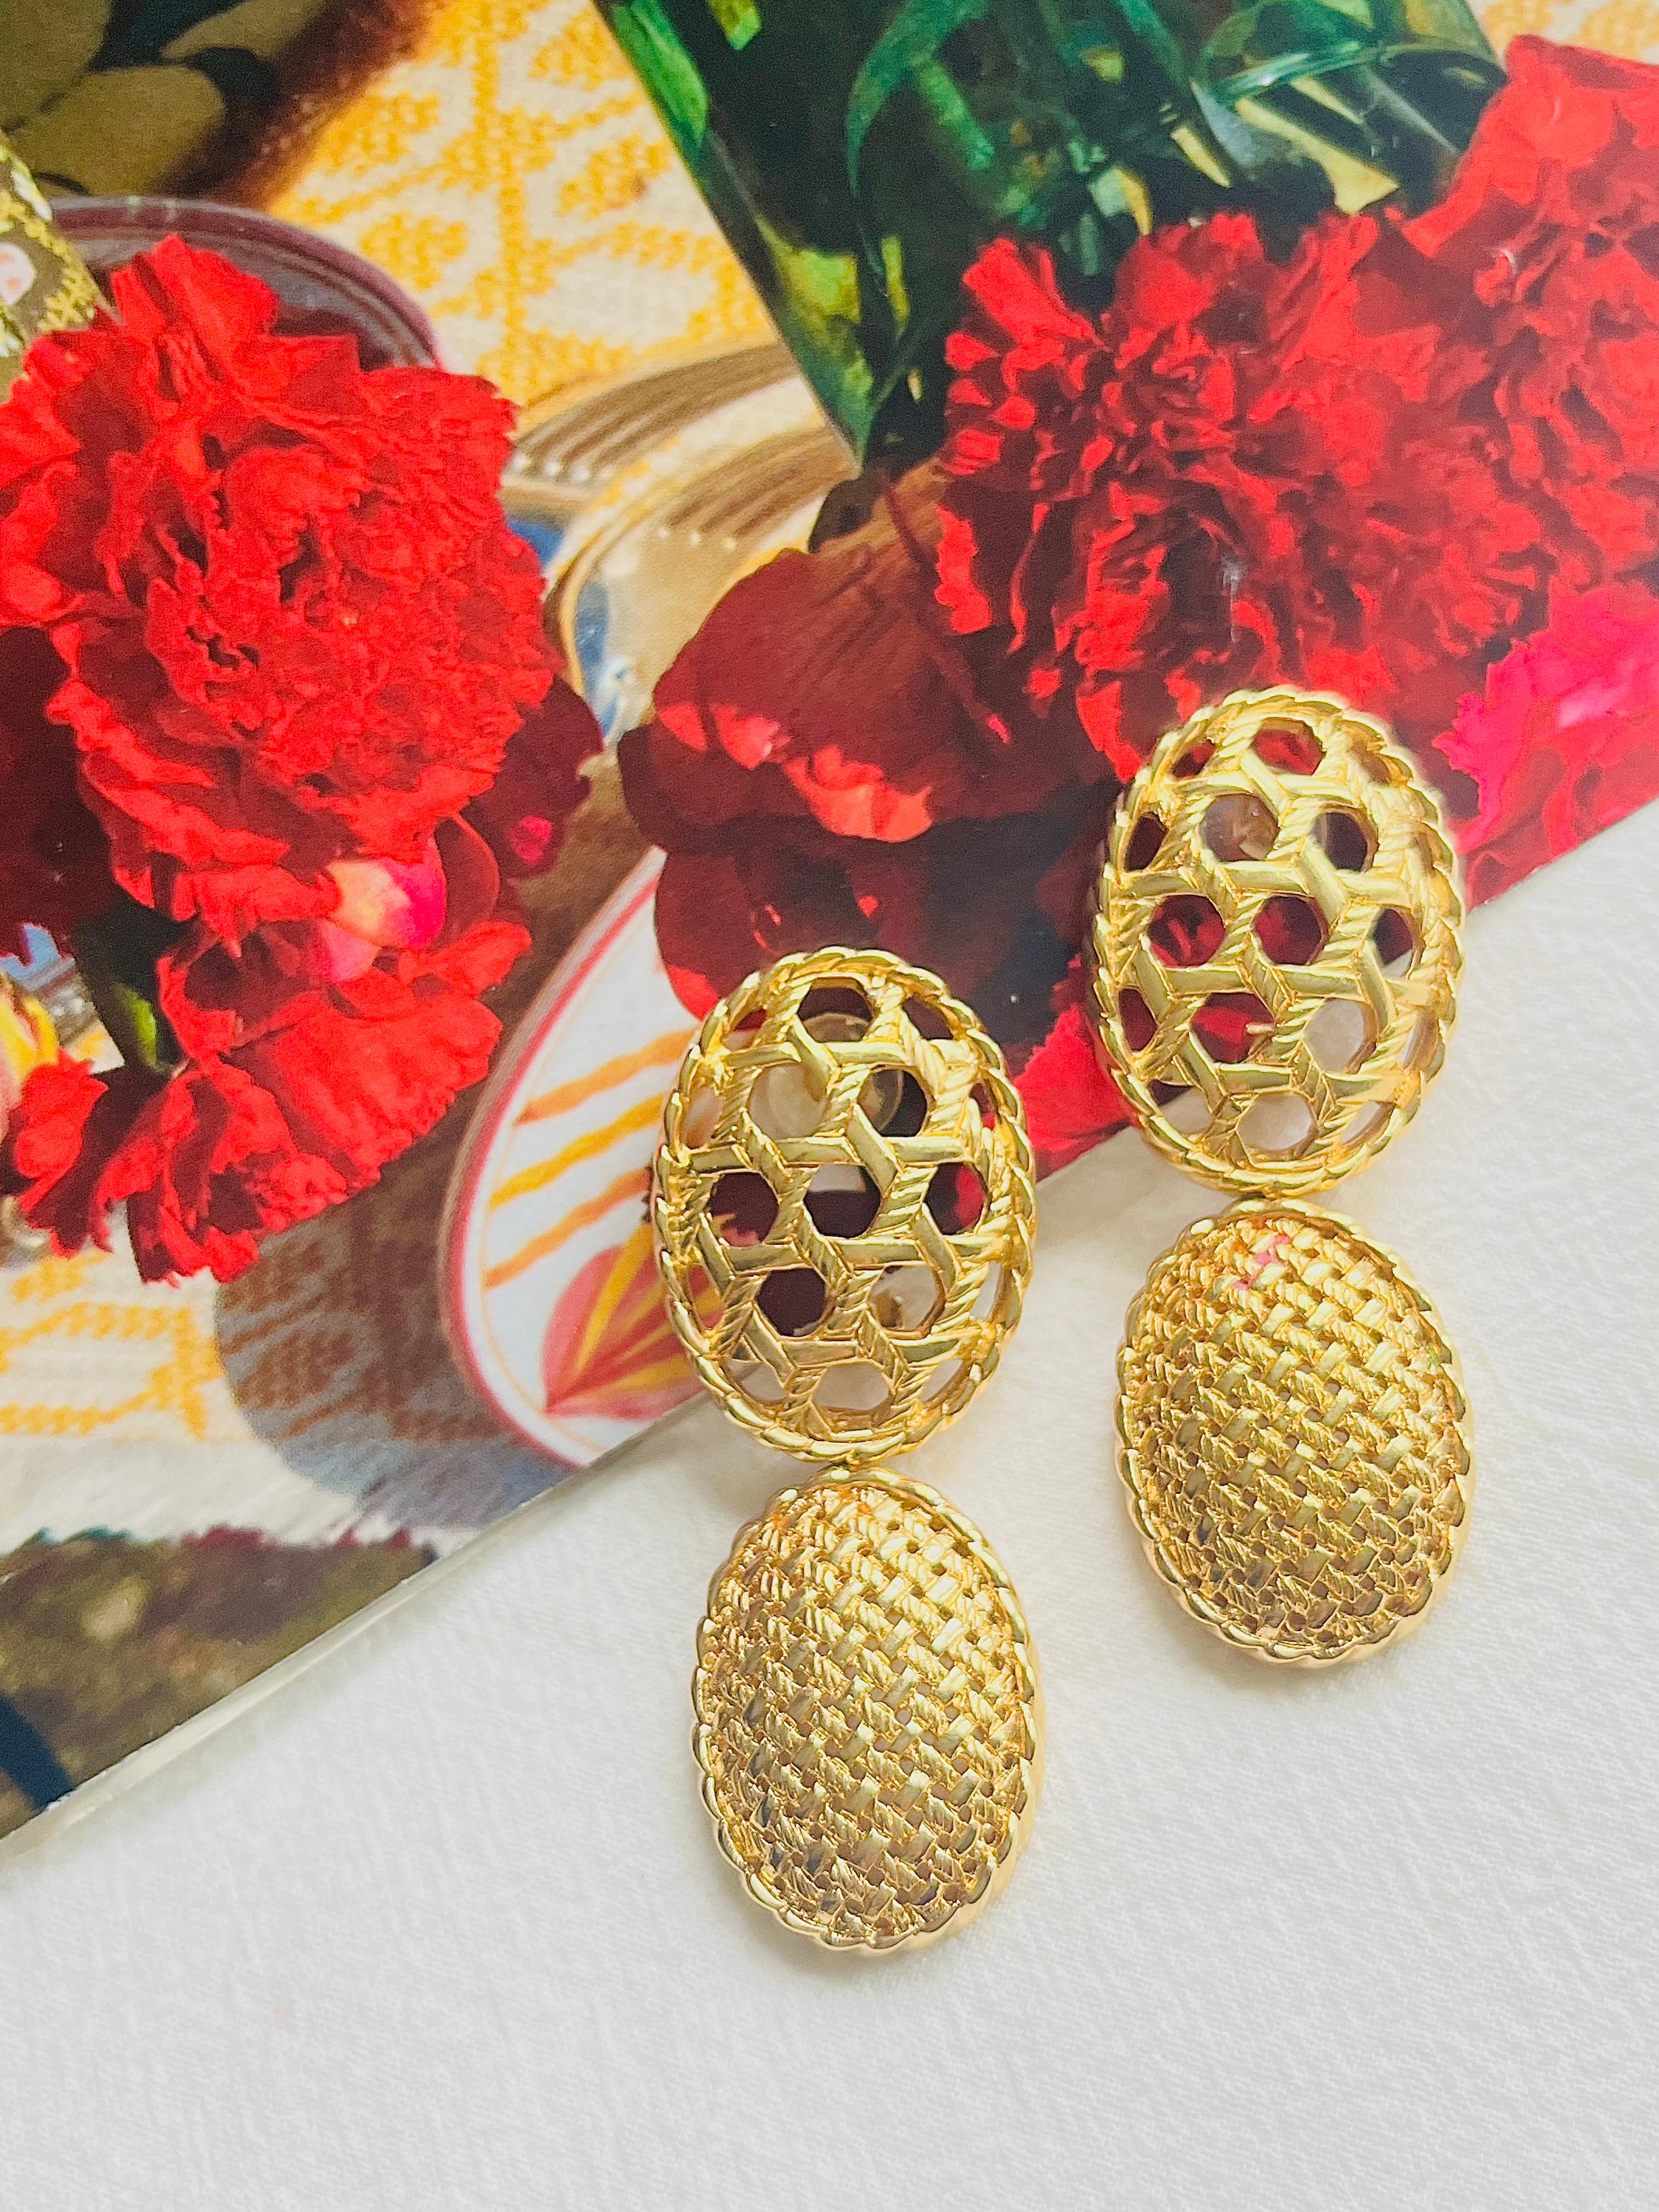 Christian Dior 1980 Vintage Large Double Oval Mesh Openwork Chunky Modernist Drop Clip Earrings, Gold Plated

Very excellent condition. Marked 'Chr.Dior (C) '. 100% Genuine.

It is around 50 years old. This is a very stylish and rare piece of